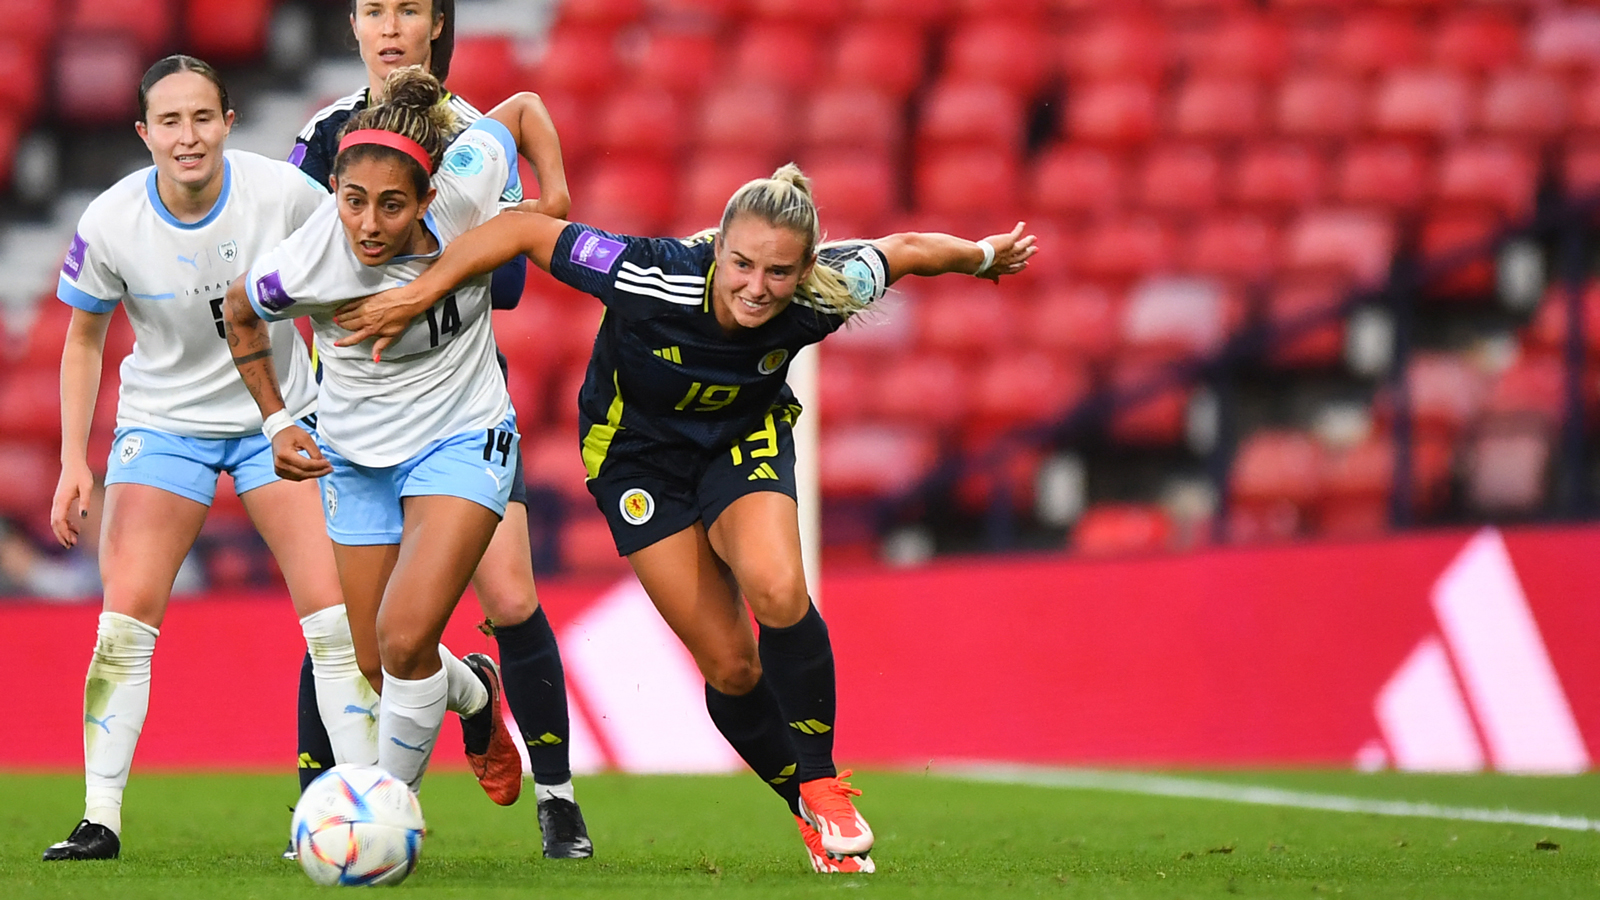 Kirsty Smith in action for Scotland against Israel